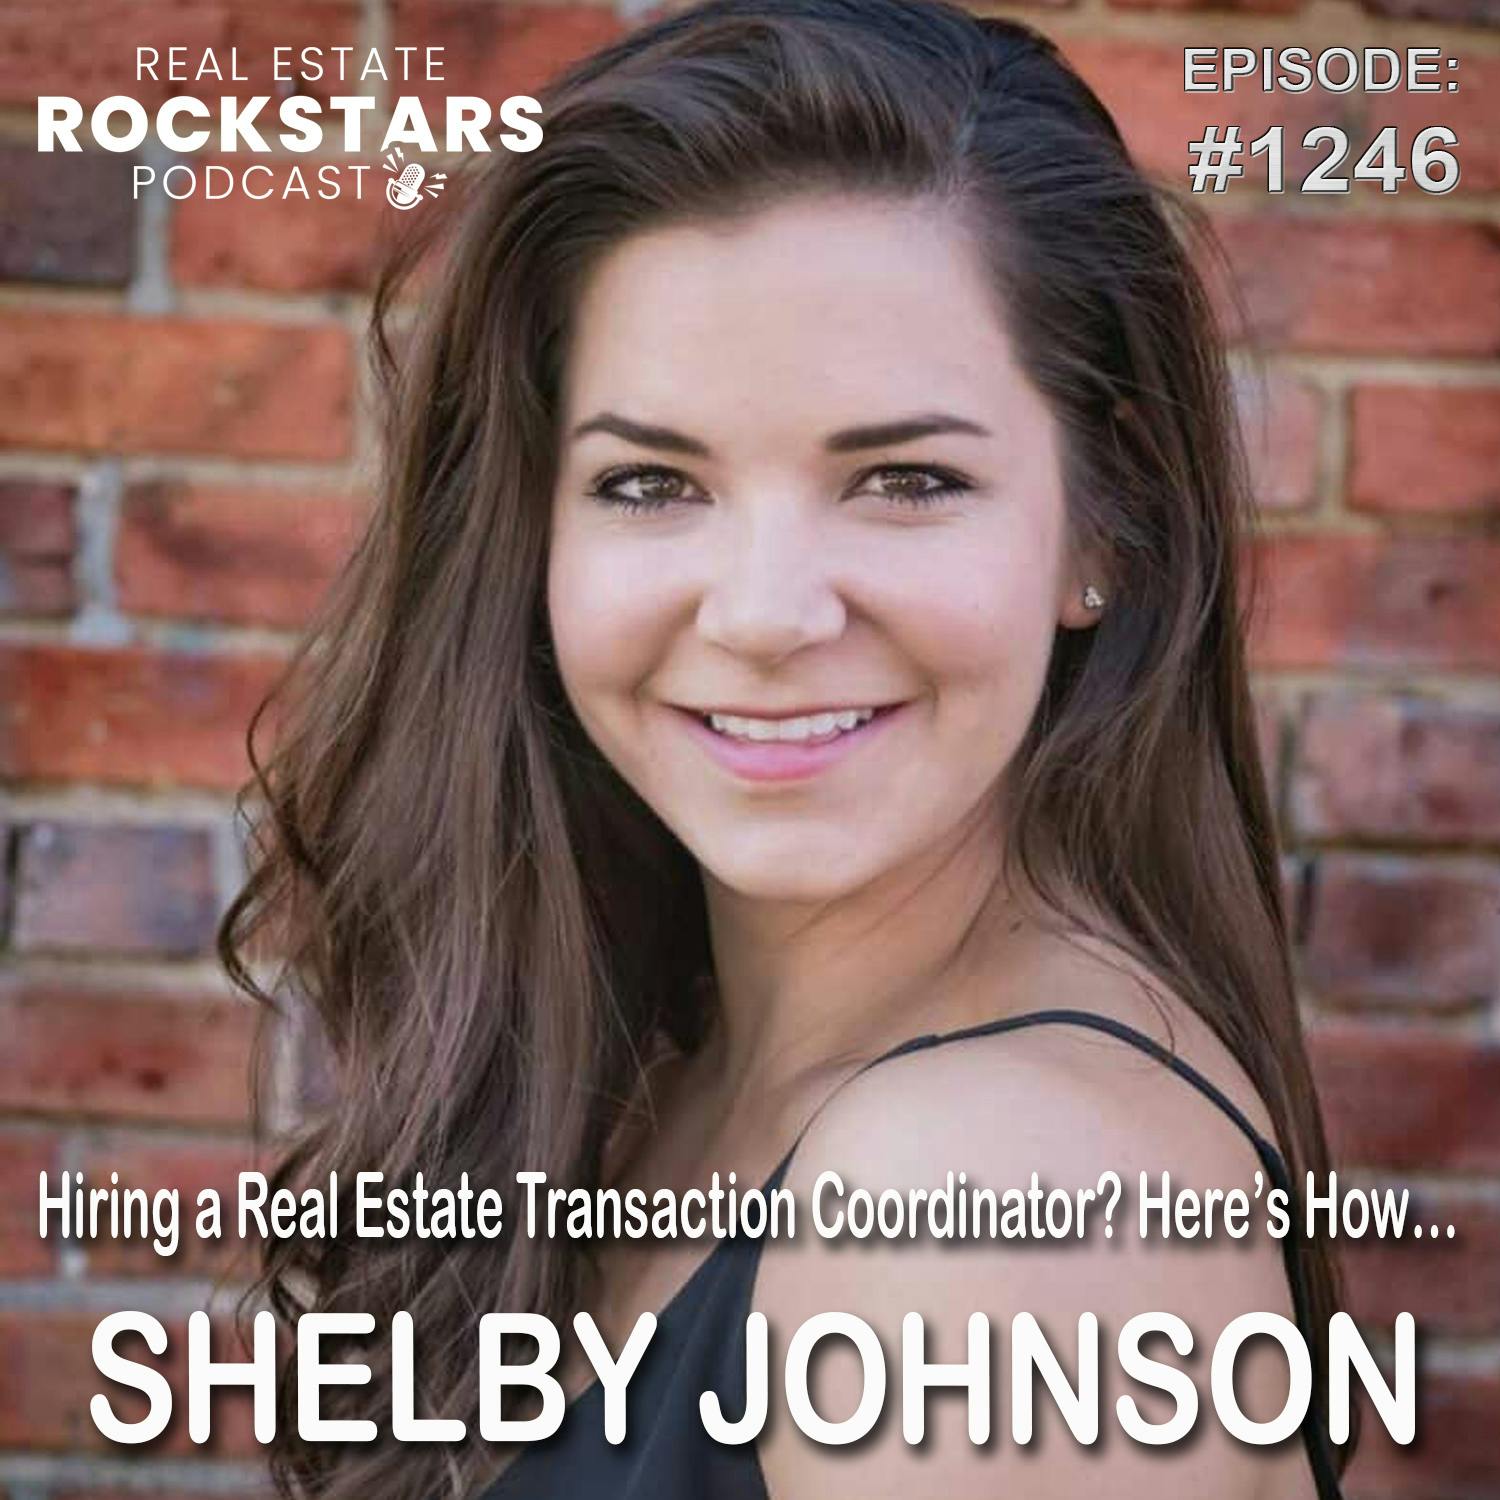 1246: Mistakes to Avoid, Red Flags, and When to Hire a Transaction Coordinator with Shelby Johnson